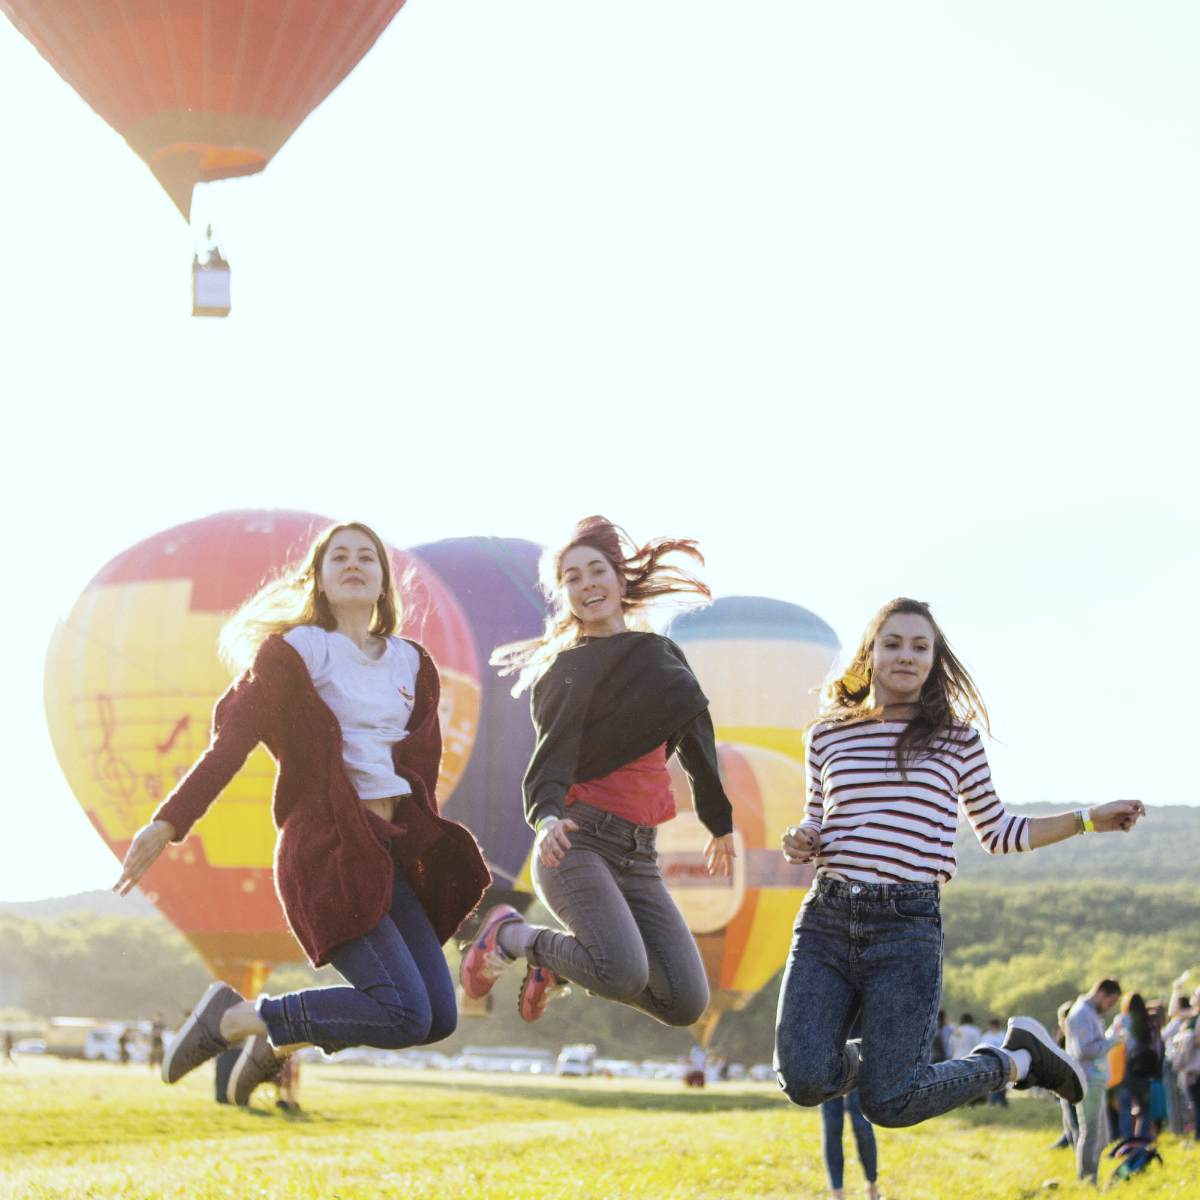 three women jumping above green grass with hot air balloon on the background | Bachelorette Party Ideas For A Weekend Of Wellness [INFOGRAPHIC] | relaxing bachelorette party ideas | classy bachelorette party ideas 